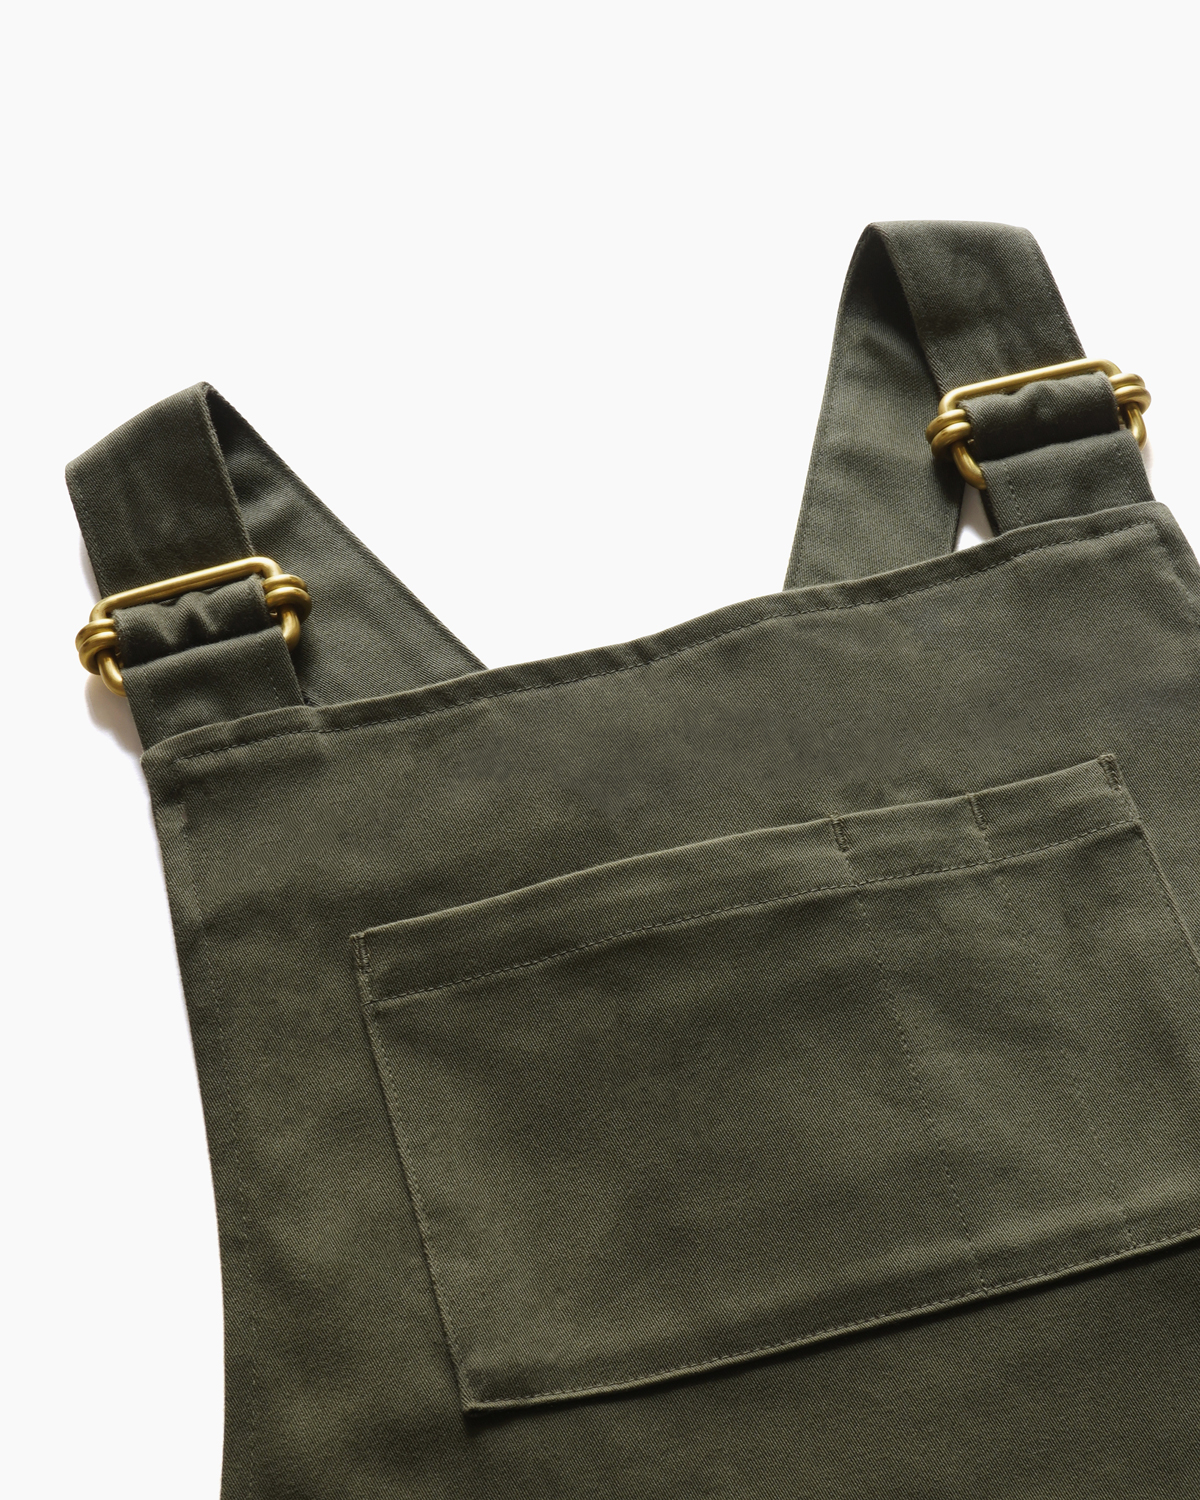 NEAT｜COTTON SATIN │OVERALL - OLIVE｜PRODUCT｜Continuer Inc 